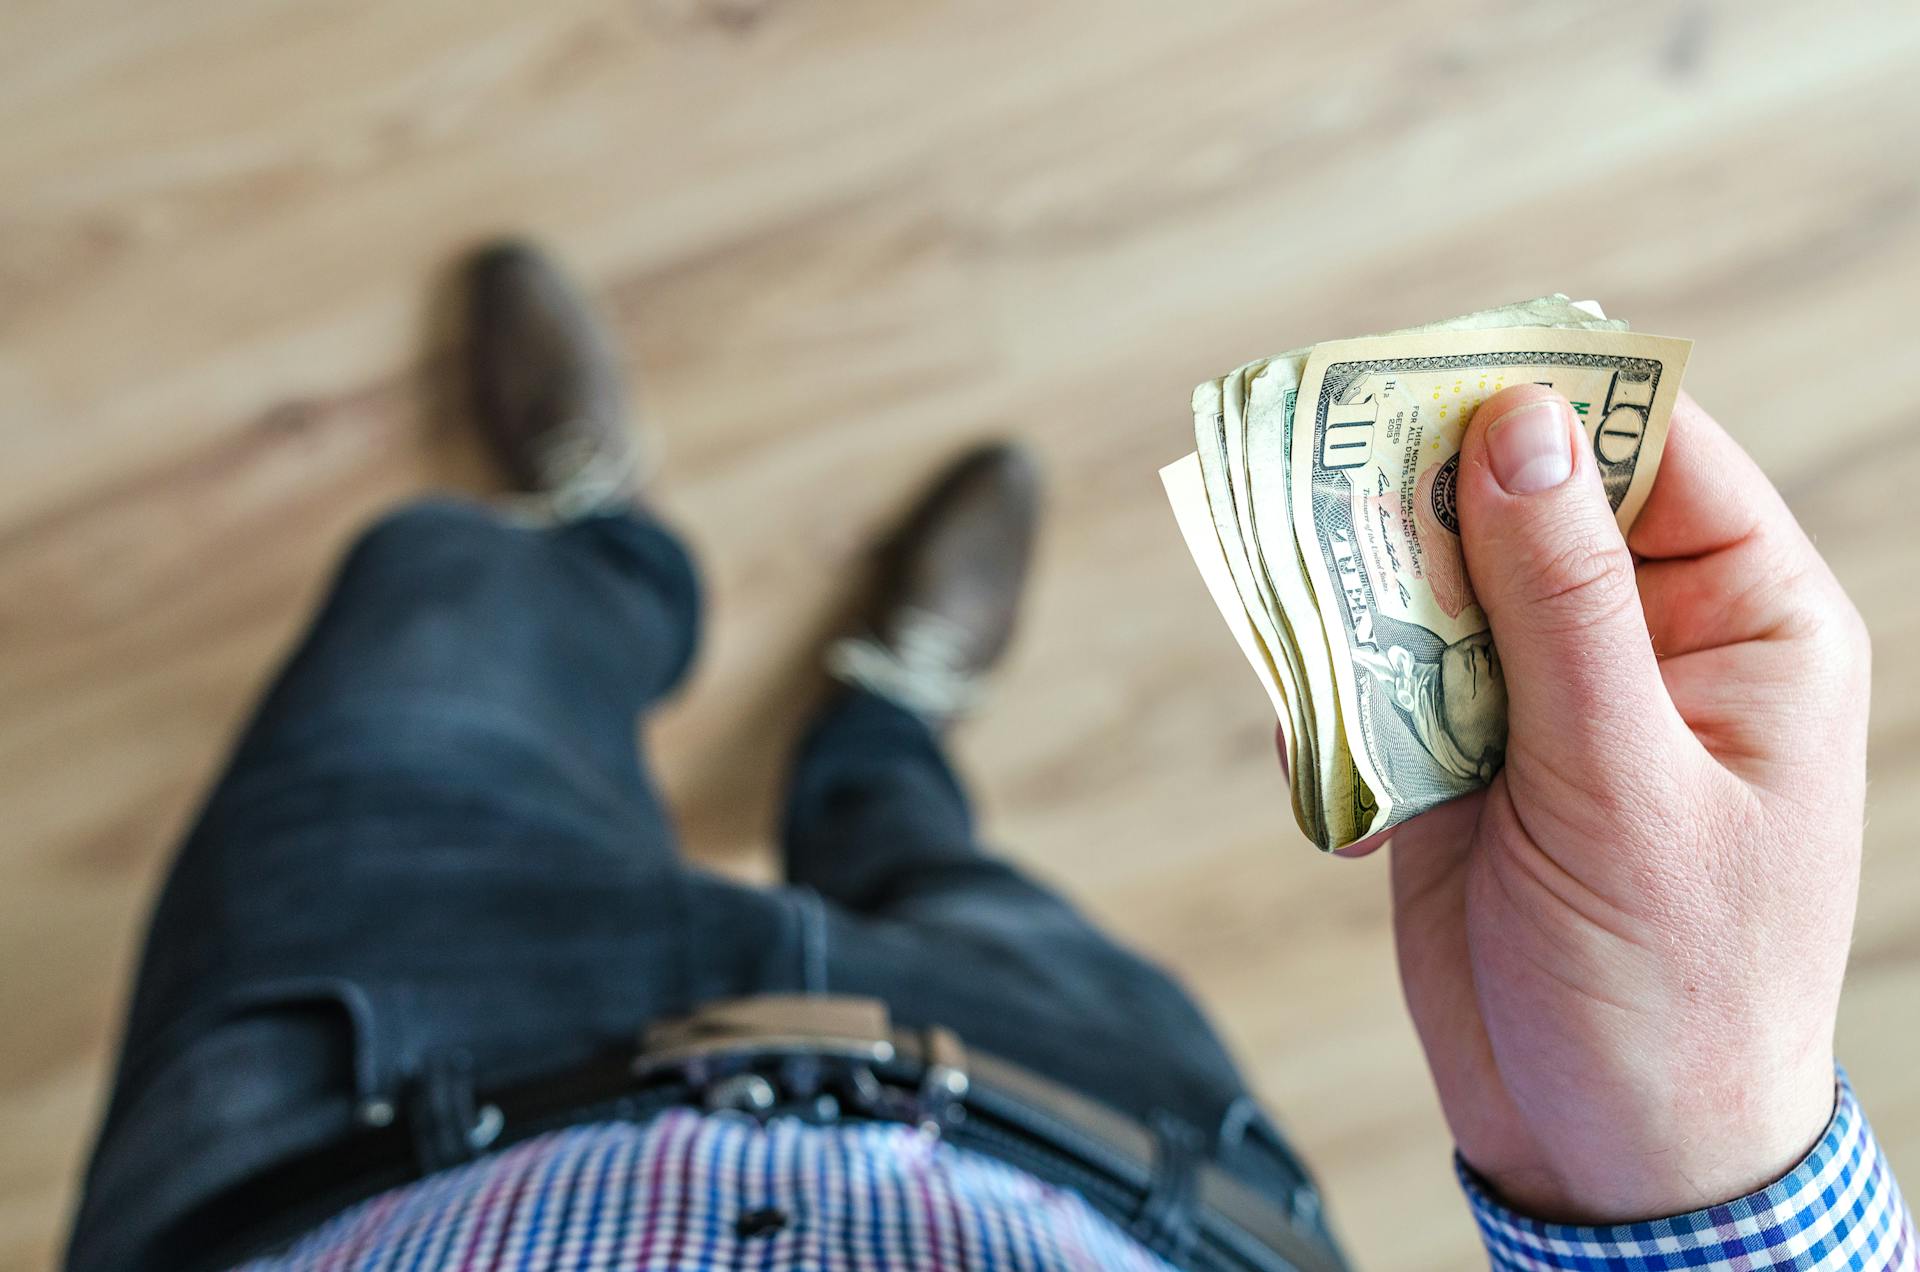 A person holding dollar bills | Source: Pexels